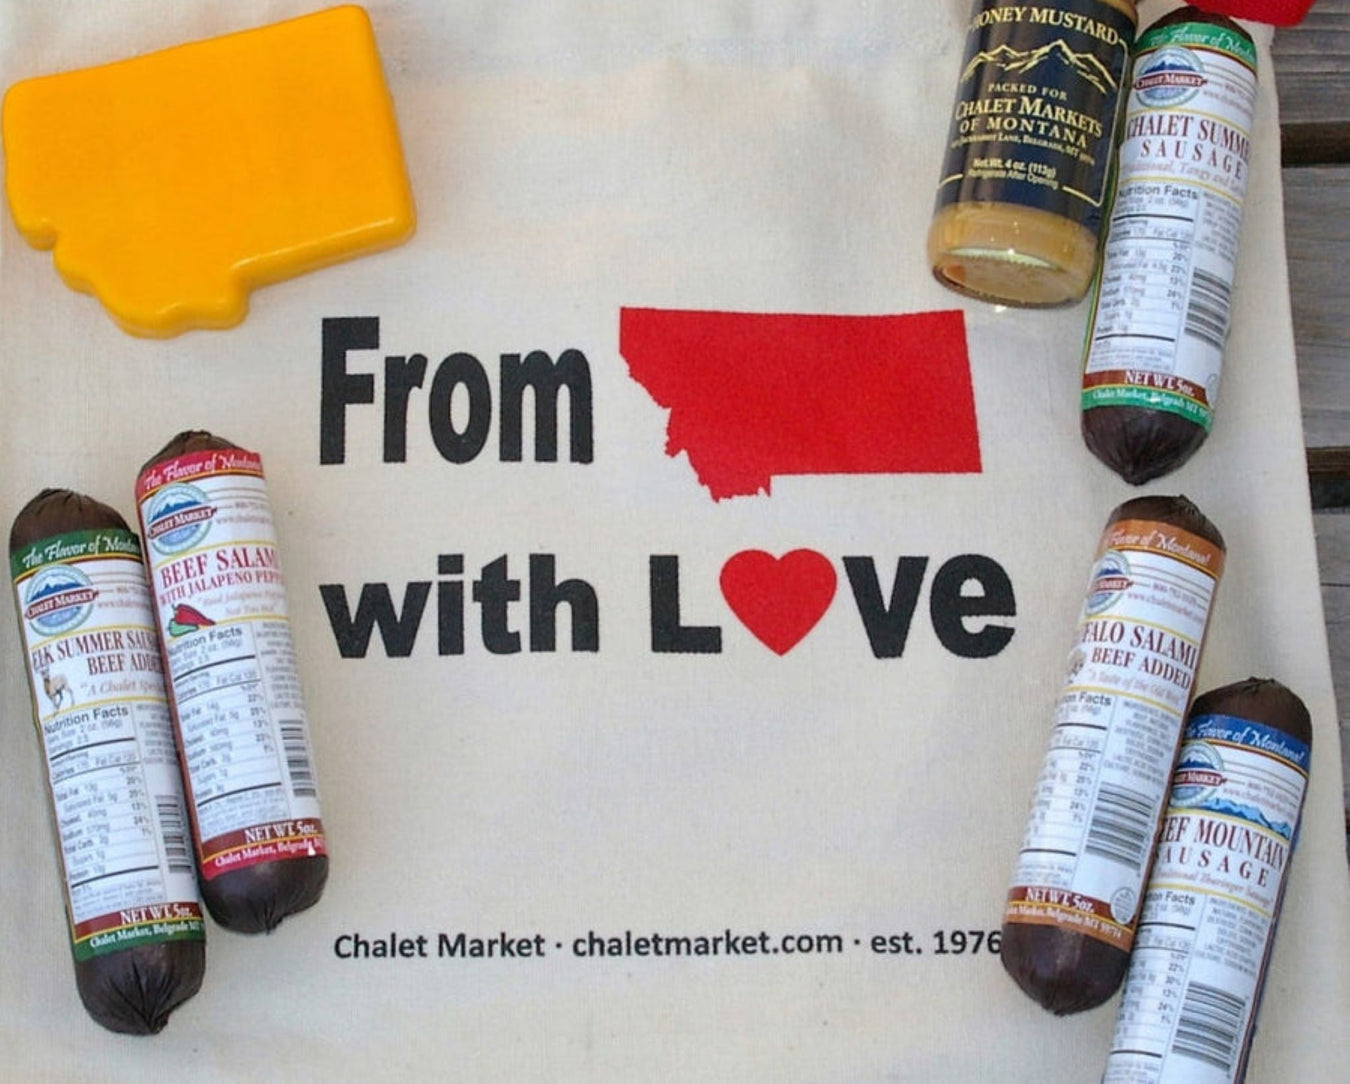 Chalet Market of Montana From Montana With Love Gift Bag, Gift Bag with the state of Montana 5 salami, a Chalet Market of Montana Mustard and a Montana Shaped Cheese 